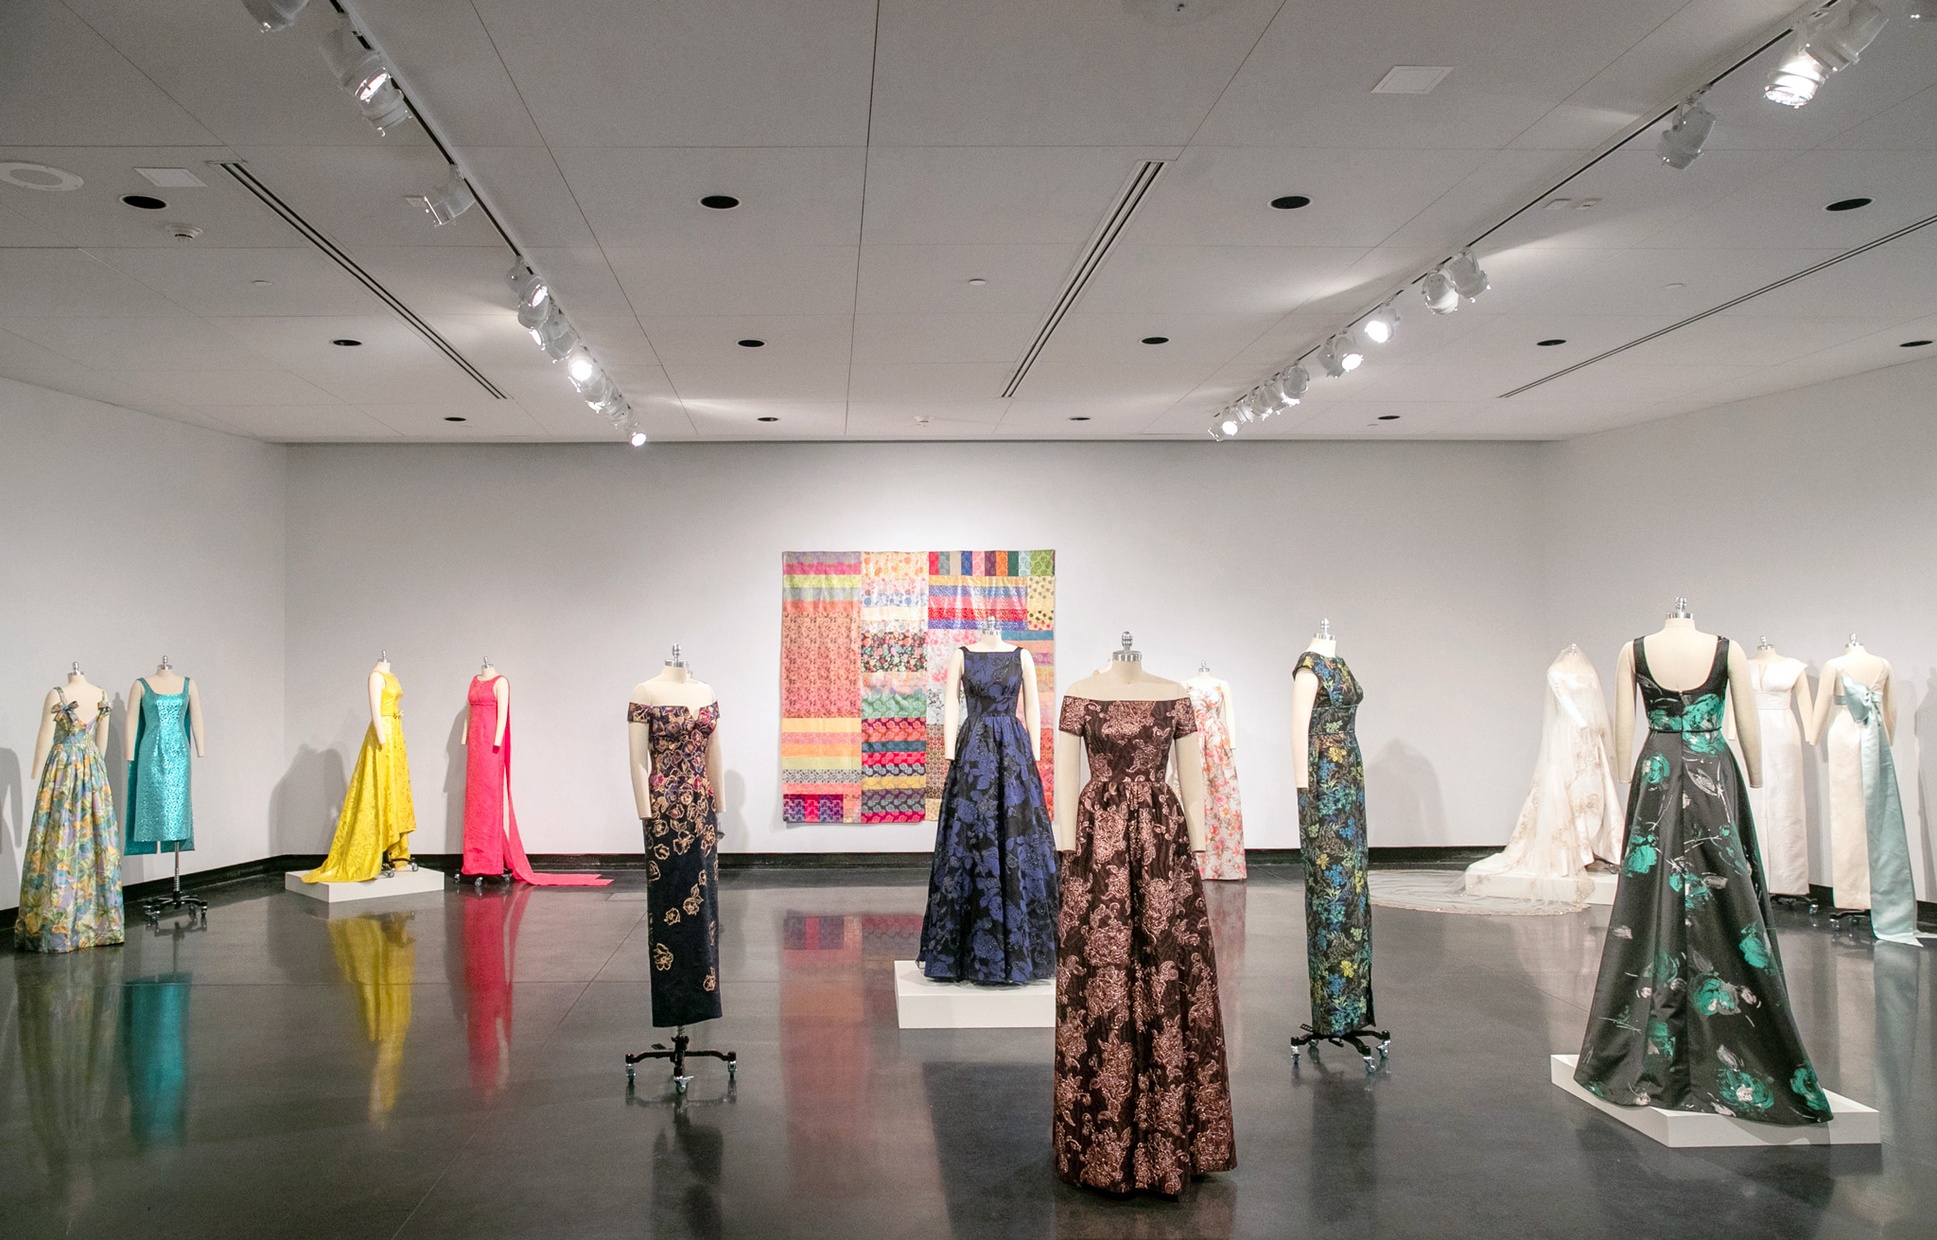 Multiple mannequins wearing colorful gowns placed throughout a room with a quilt hanging on the back wall.